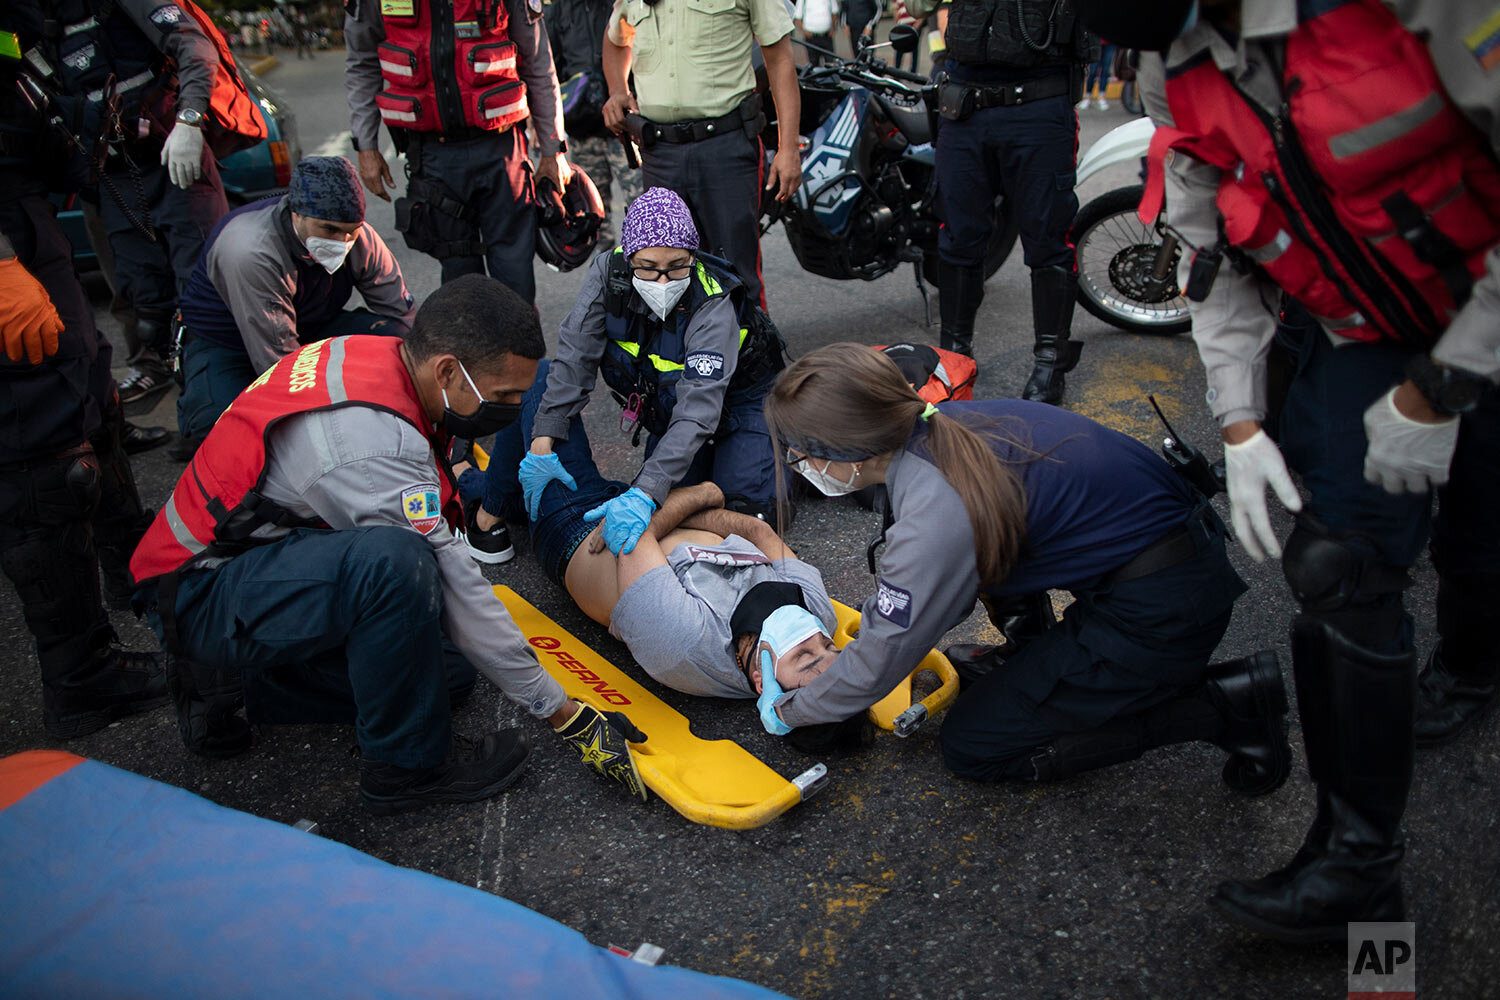  Wearing masks as a precaution against the new coronavirus, Angels of the Road volunteer paramedics, in grey and blue uniforms, place a motorcycle accident victim onto a scoop stretcher, in Caracas, Venezuela, Monday, Feb. 8, 2021. (AP Photo/Ariana C